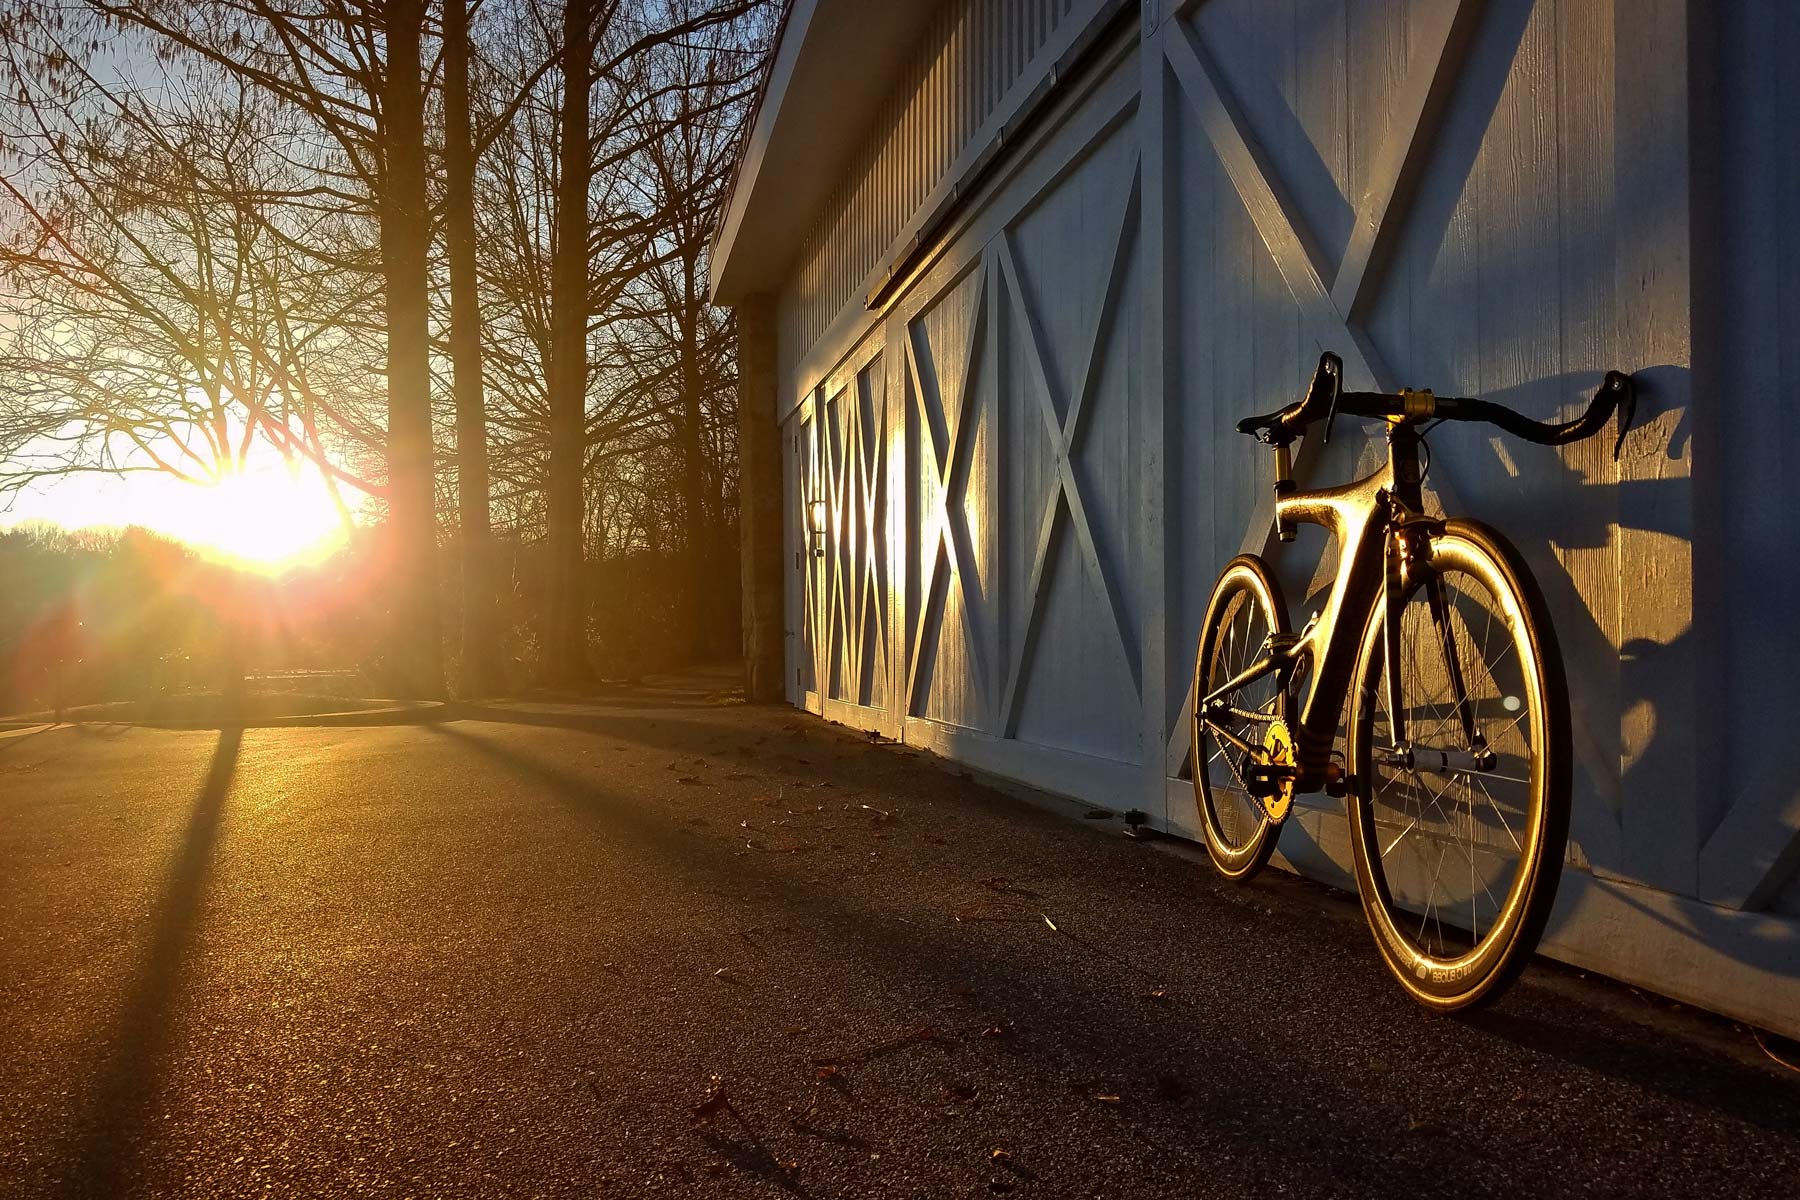 Bikerumor Pic Of The Day: Winter sunset on a classic in Maryland